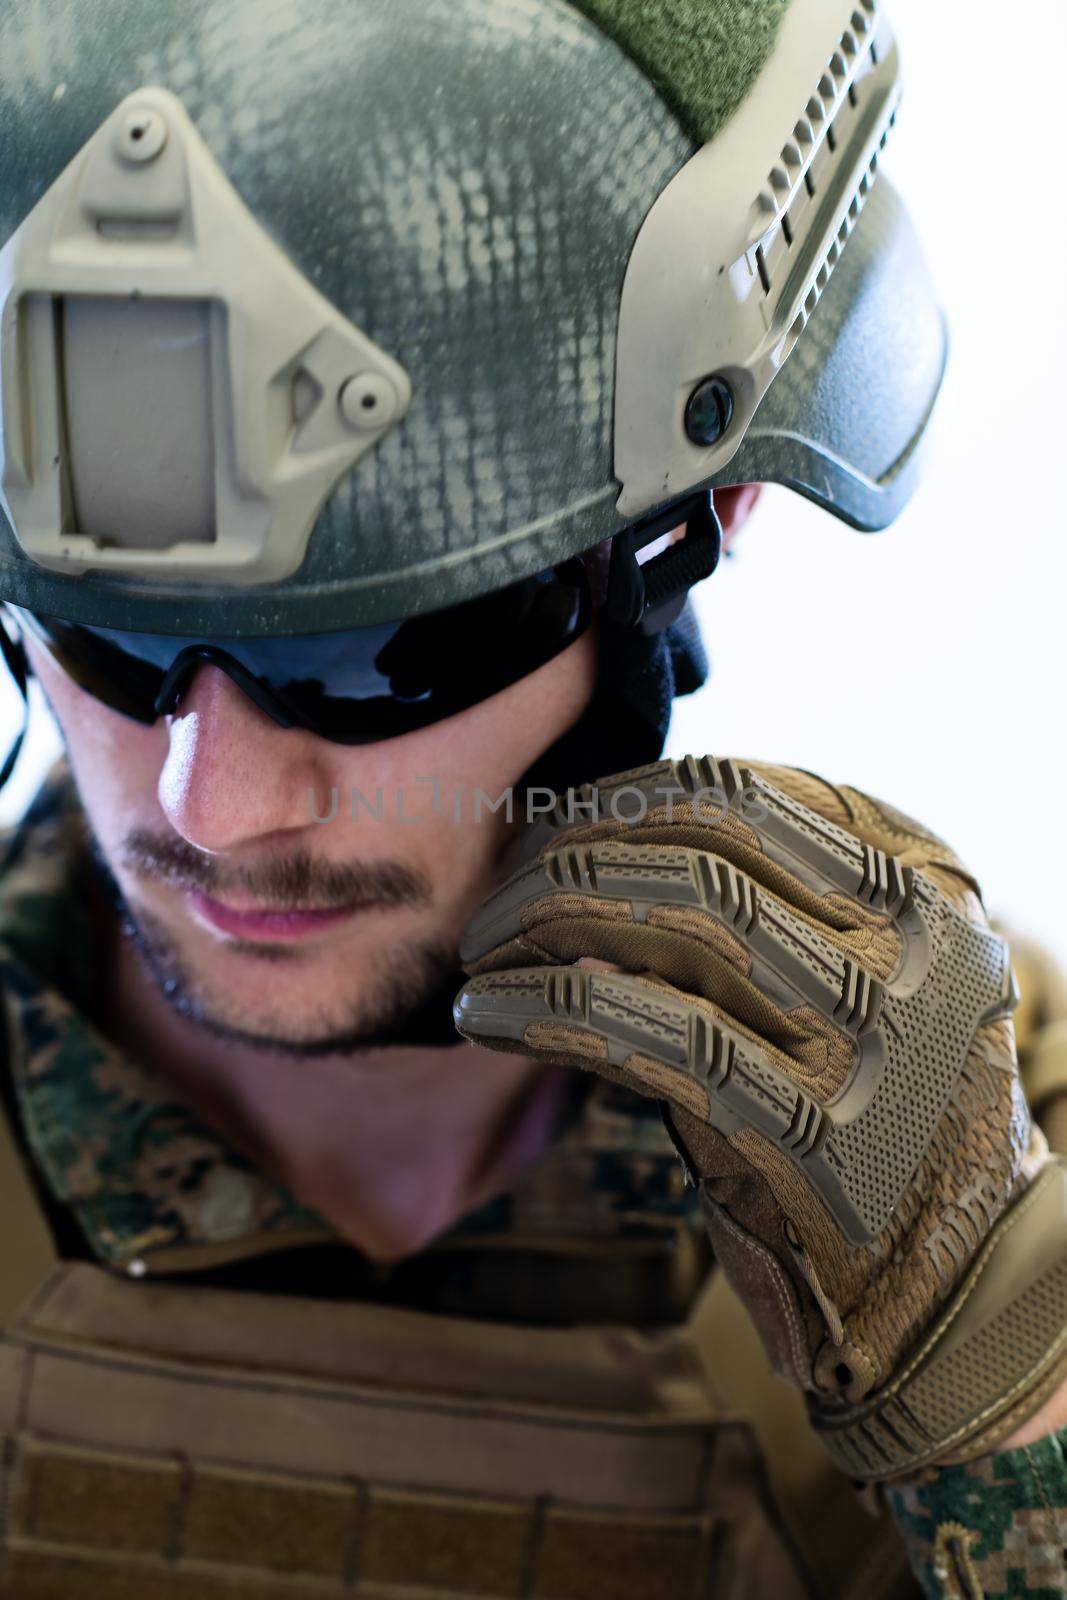 american  marine corps special operations soldier preparing tactical and commpunication gear for action battle closeup studio portrait isolated on white background